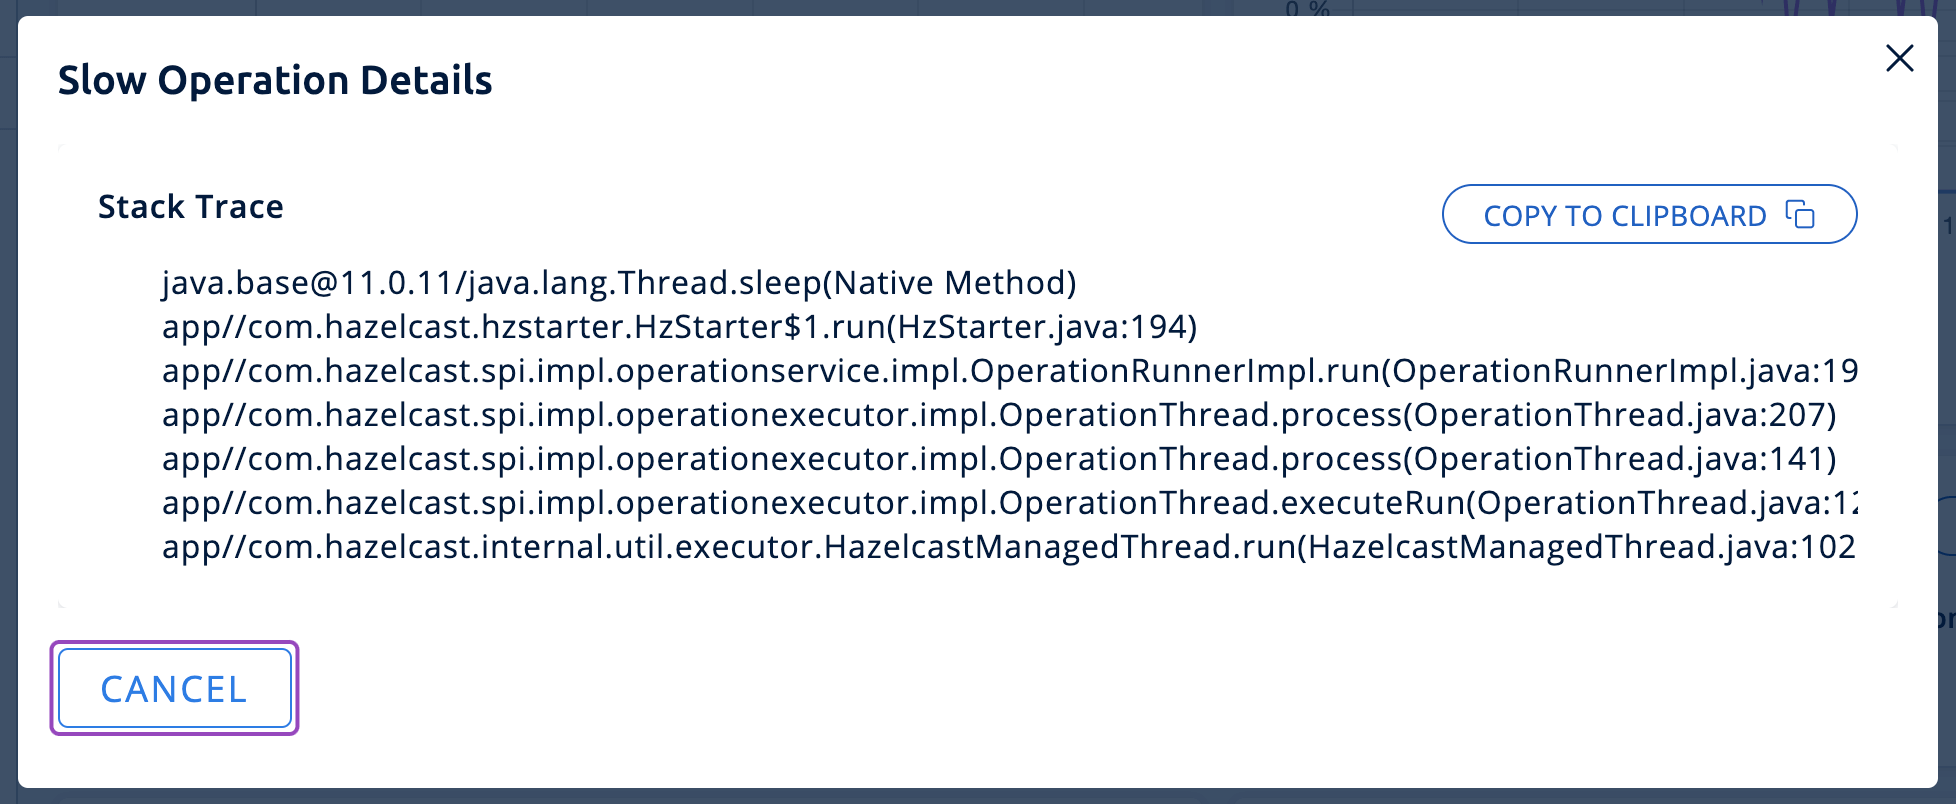 Slow Operations Details